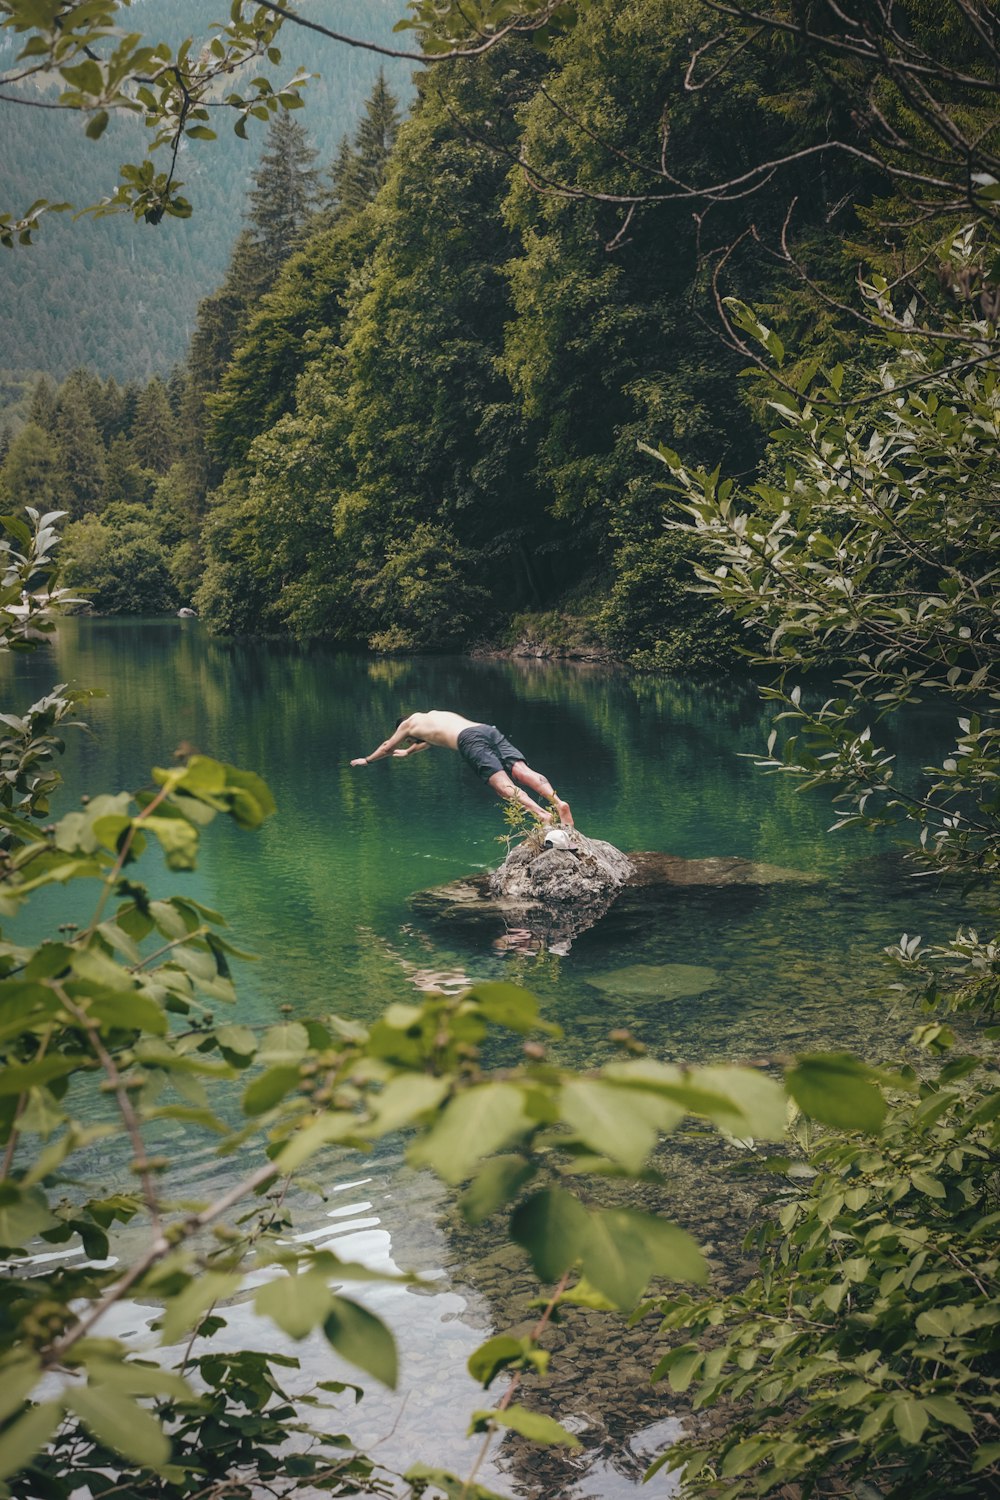 topless man wearing black shorts about to dive on water near trees